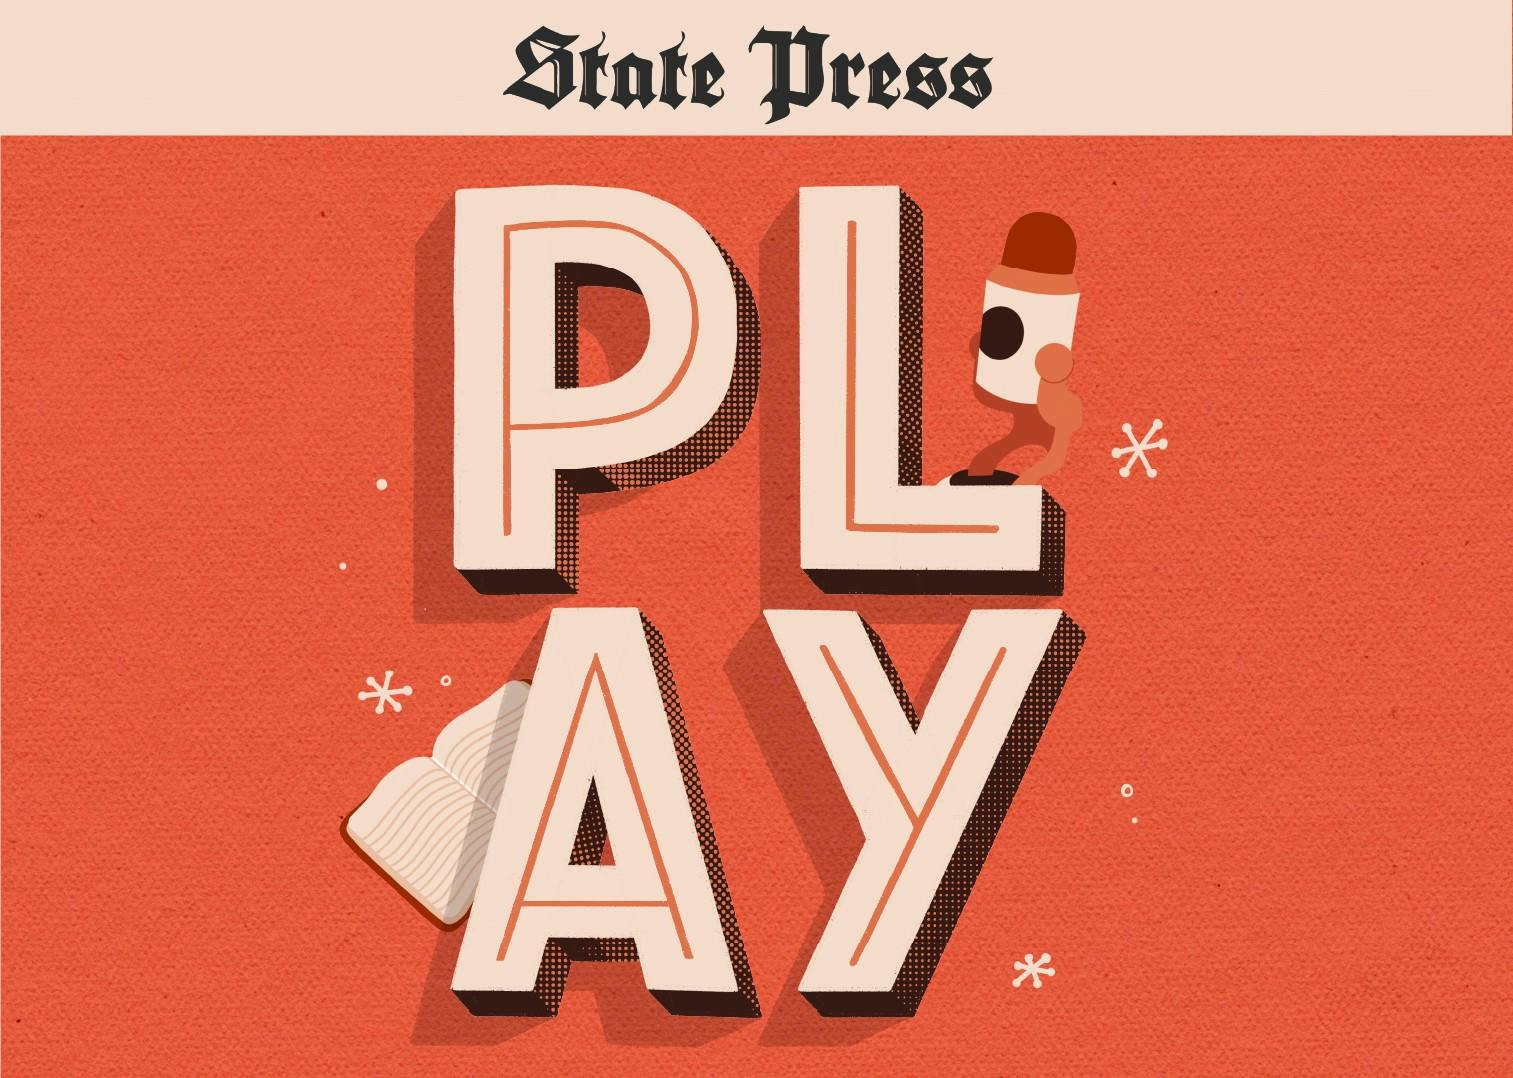 State Press Play: Barrett speaker event sparks continued online discourse -  The Arizona State Press